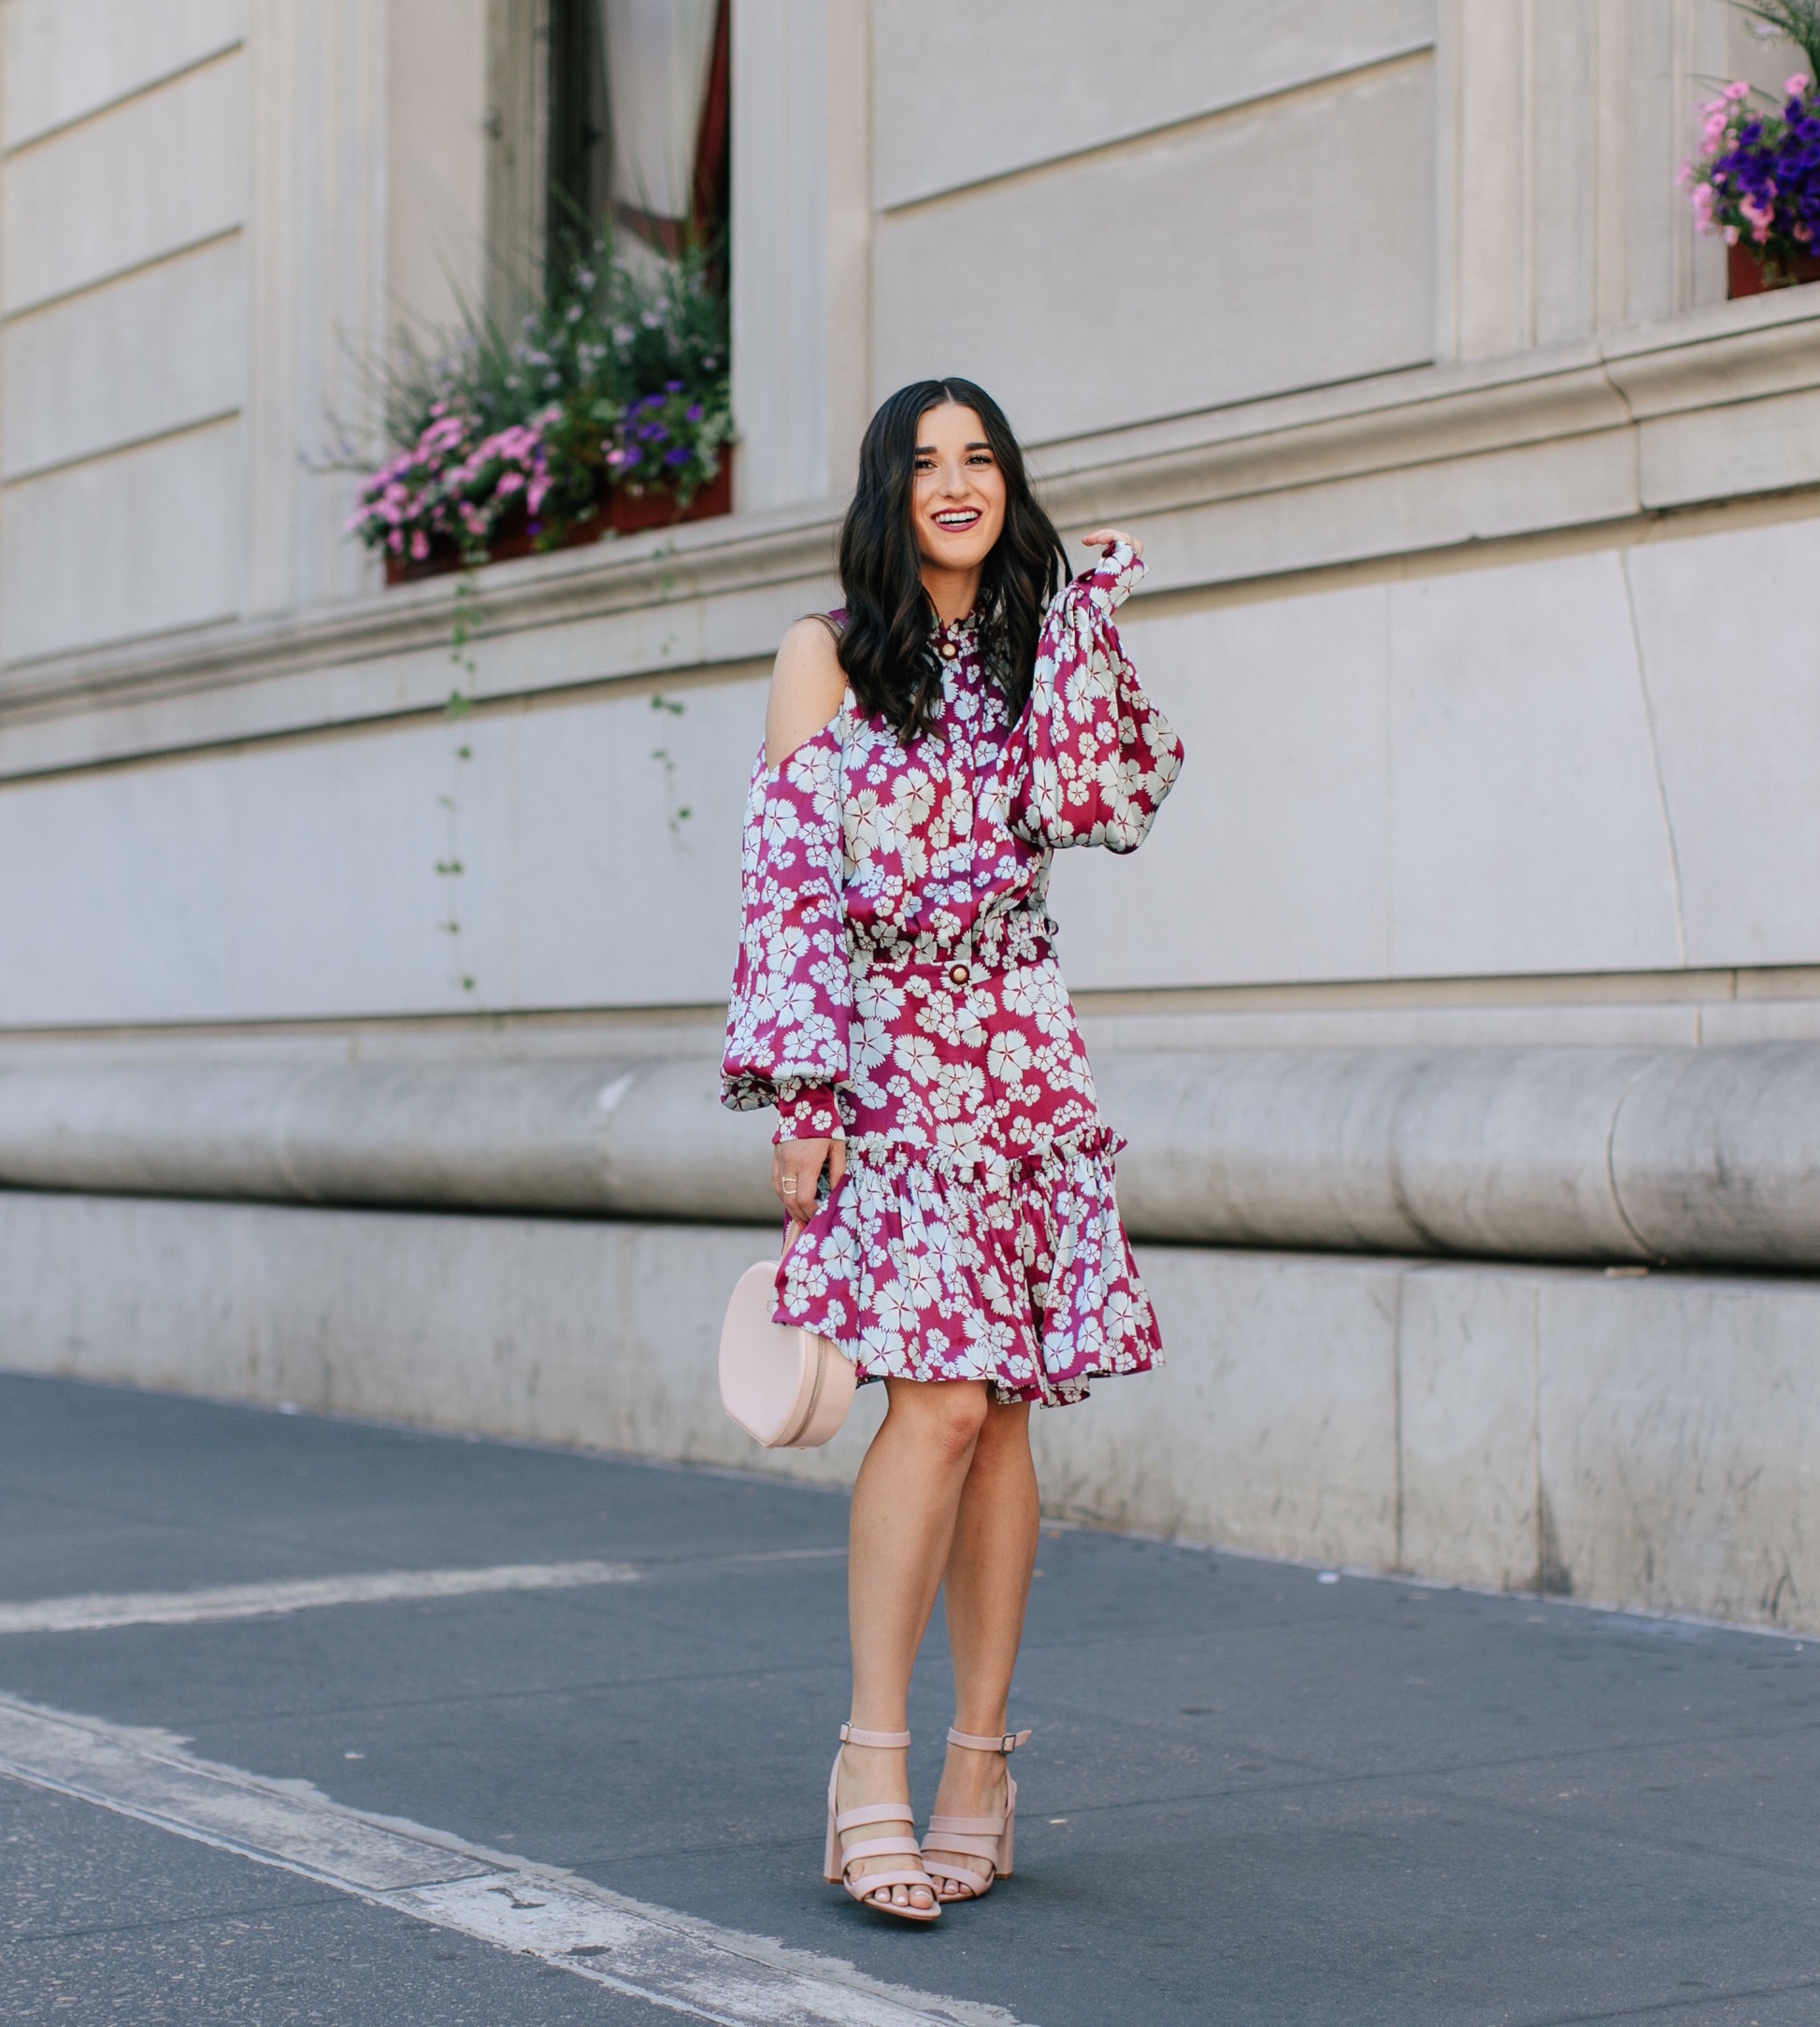 A Blogger’s Guide To Turning Your S.O. Into Your Photographer Cold Shoulder Floral Dress Esther Santer Fashion Blog NYC Street Style Blogger Outfit OOTD Trendy Designer Nordstrom Strappy Blush Pink Heels Circle Bag Shopping Wavy  Hair Diamond Jewelry.jpg